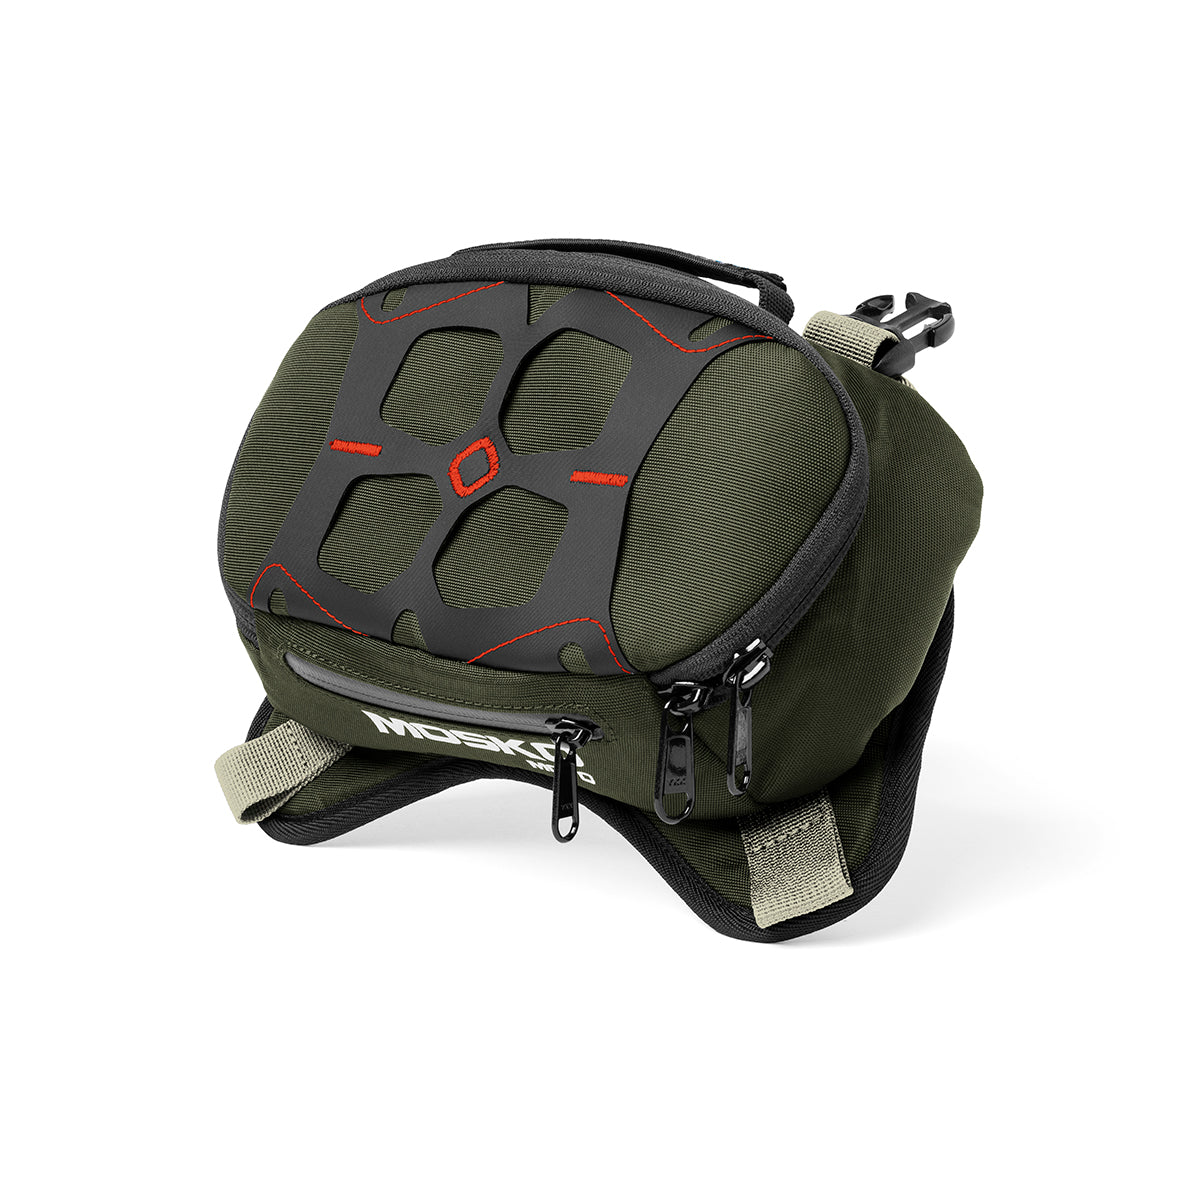 Mosko Moto backcountry offset panniers with Harley side case mounts |  Harley Davidson Pan America Forum